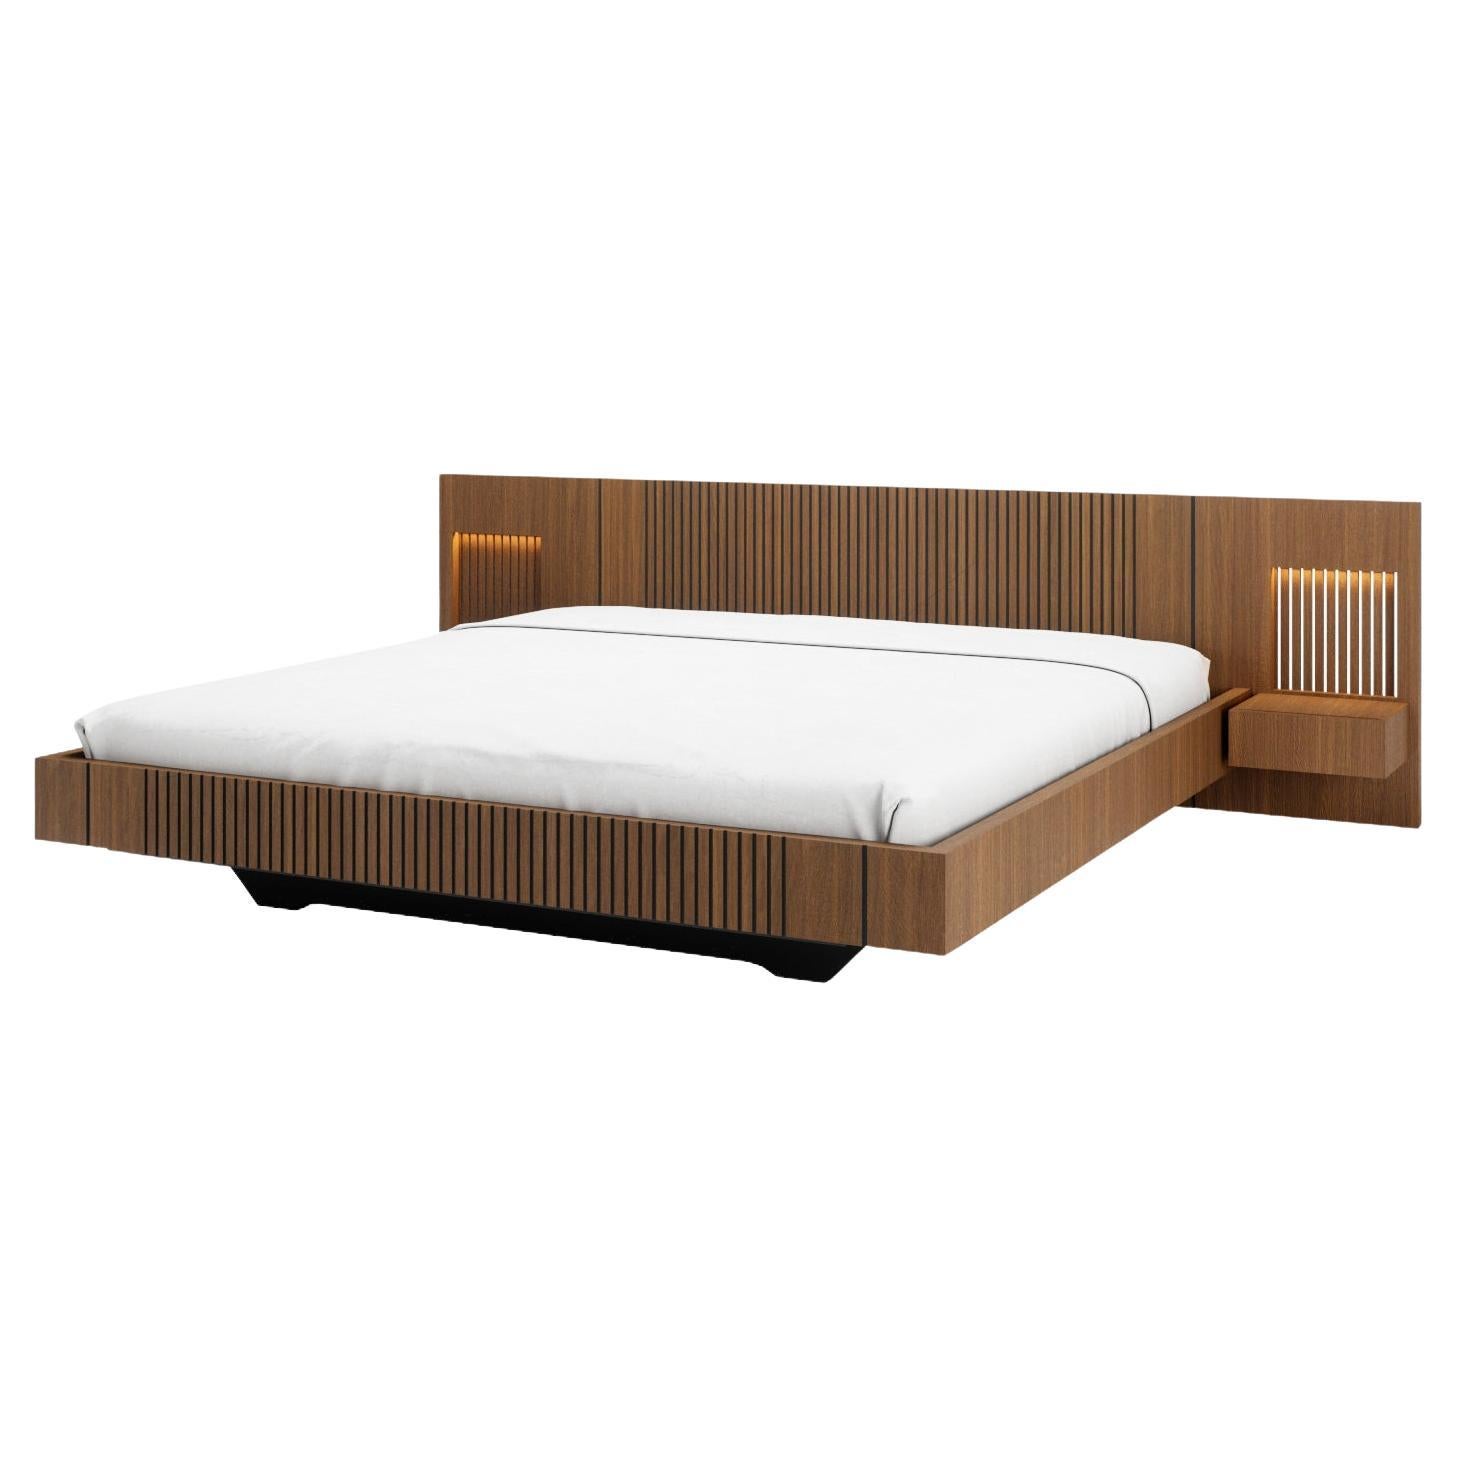 Piana 213cm Size Bed with 2 Drawers and Leds on Bed Head For Sale